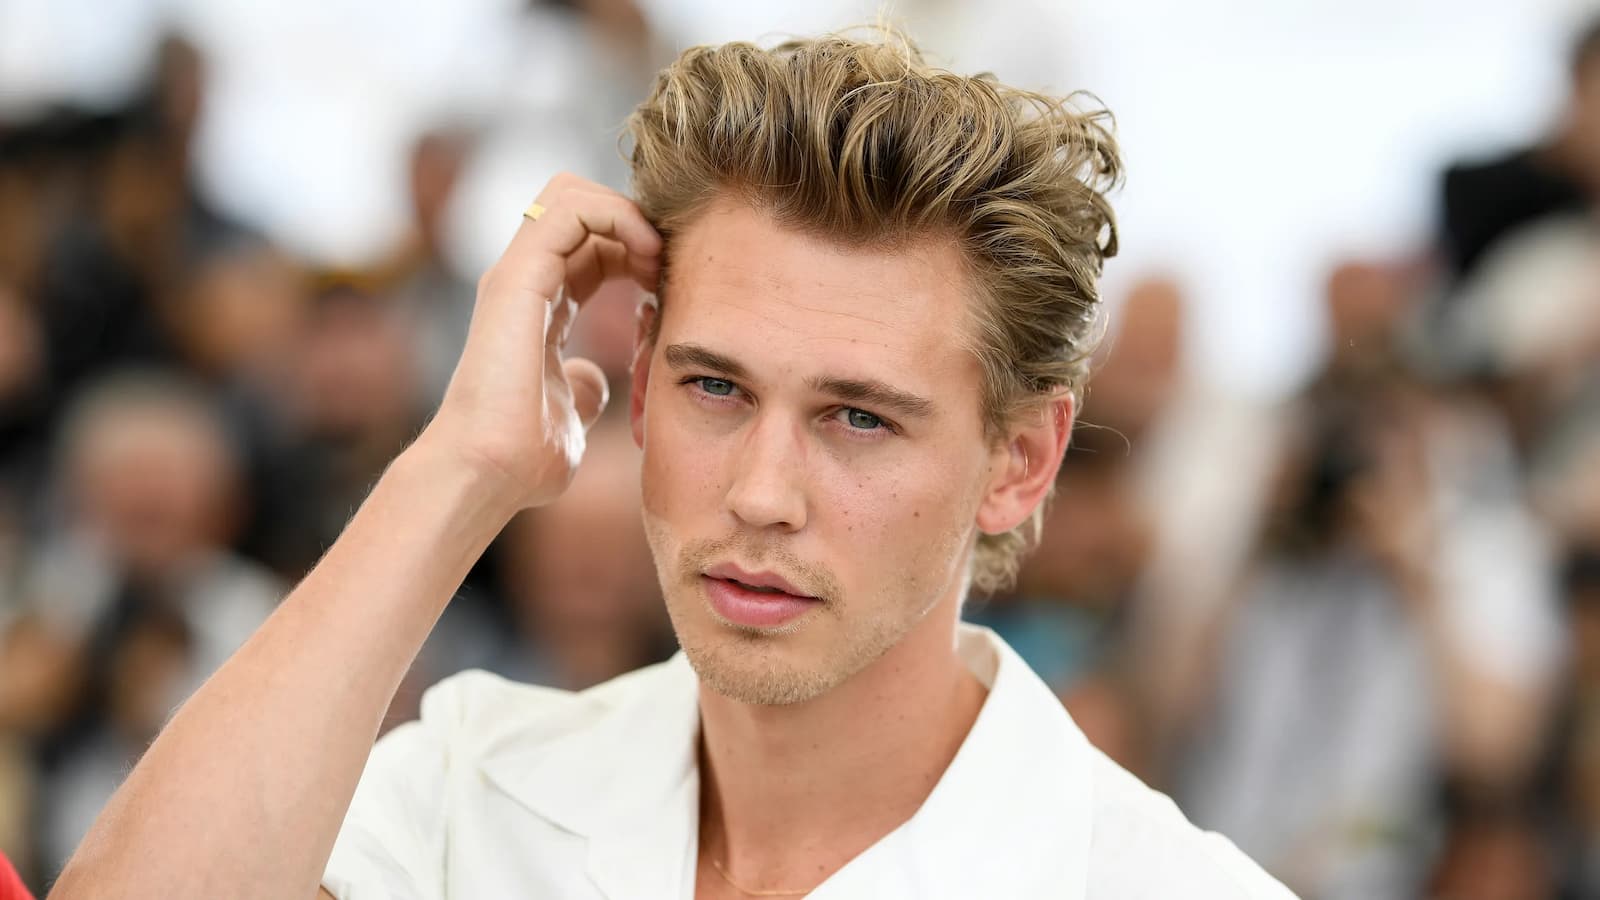 Is Austin Butler Gay? Let's breaks the silence on his personal life